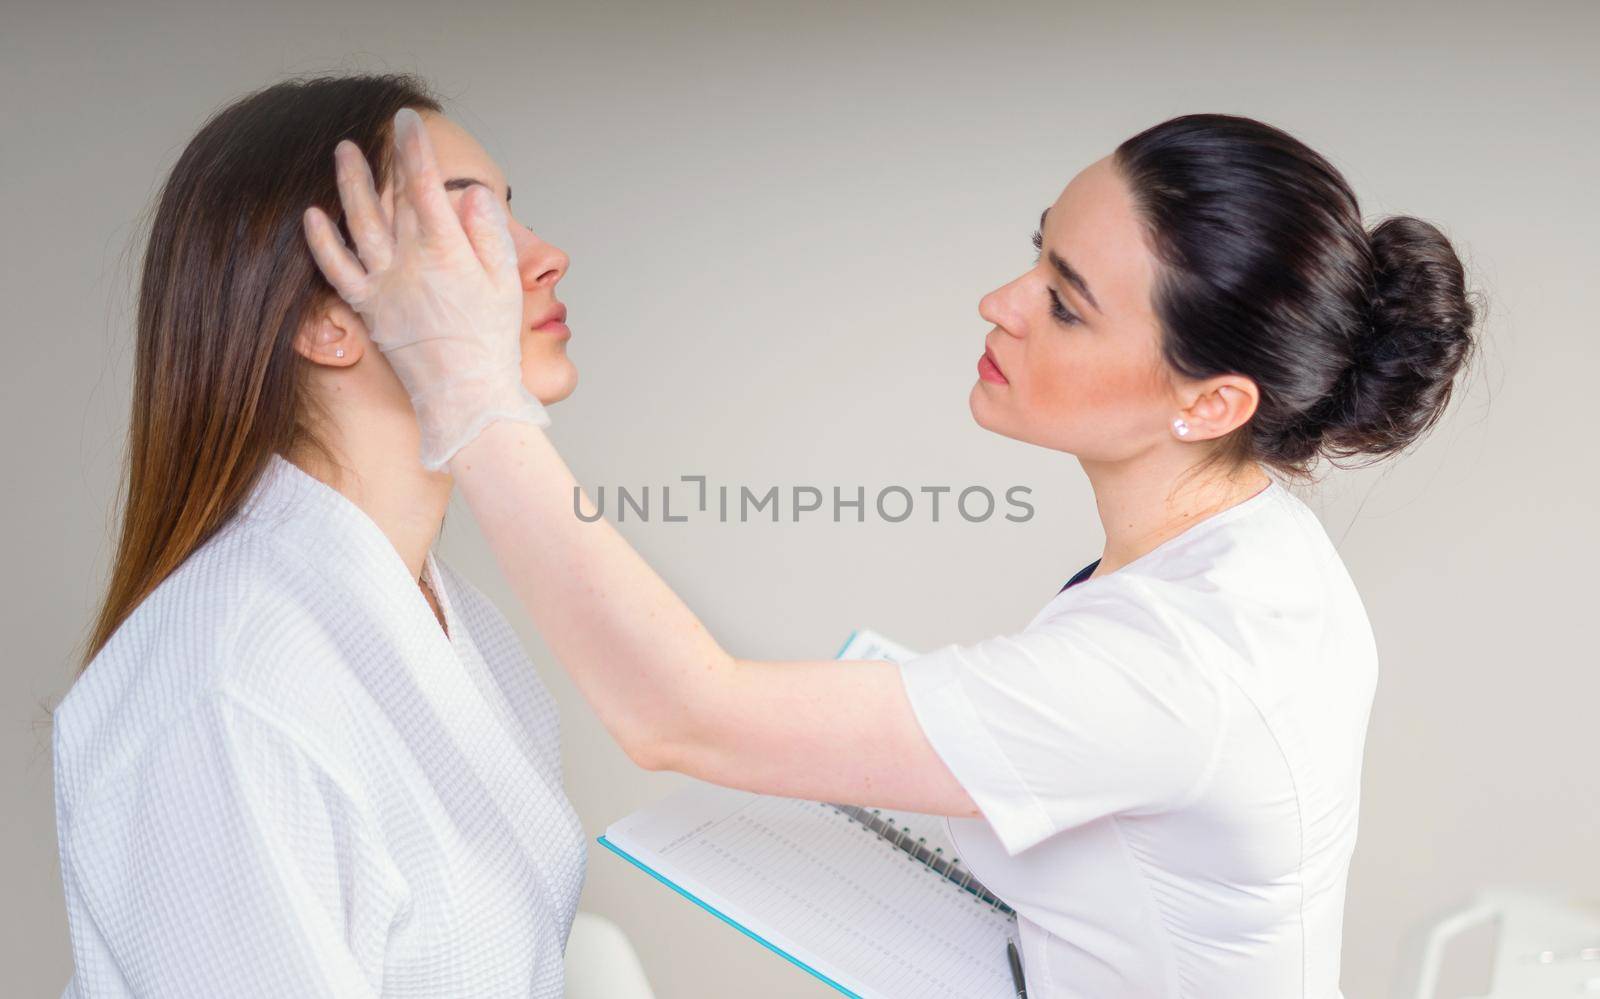 Curing skin problems. female cosmetologist looking at client's face through magnifying lamp examining her skin.